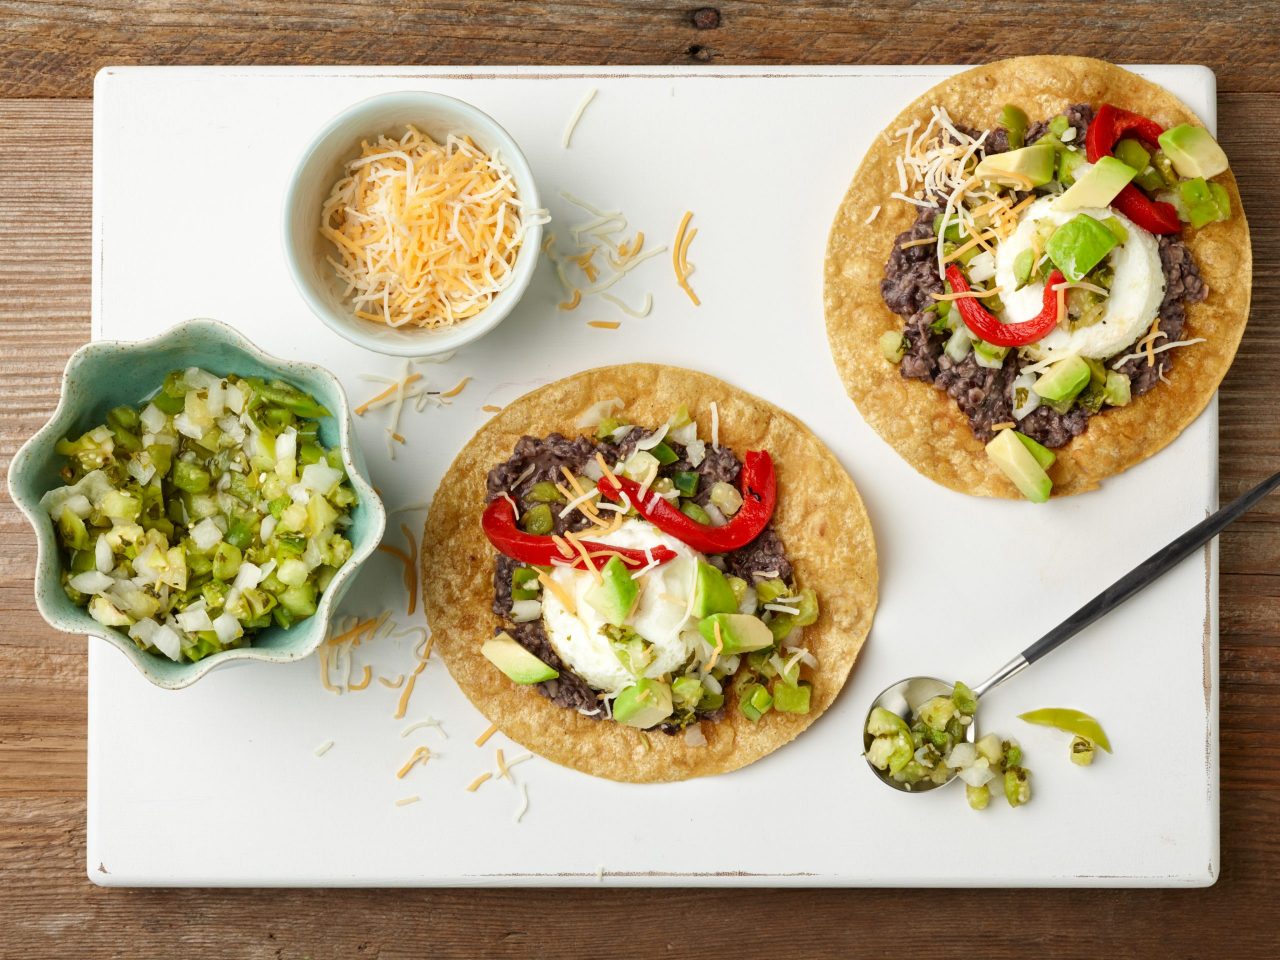 Food Network Kitchen's 15-Minute Bean, Egg, and Avocado Tostadas.